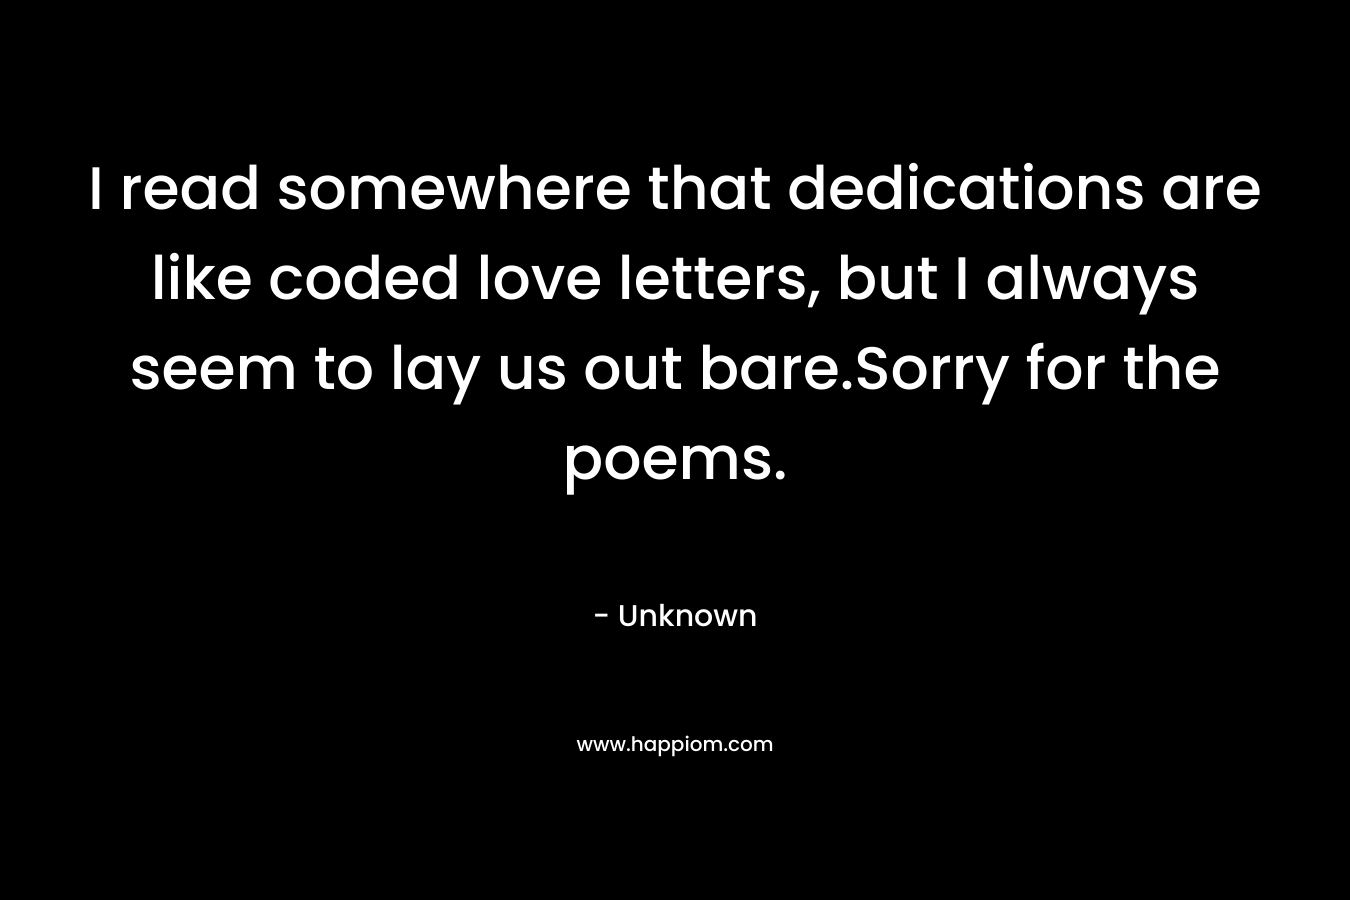 I read somewhere that dedications are like coded love letters, but I always seem to lay us out bare.Sorry for the poems. – Unknown